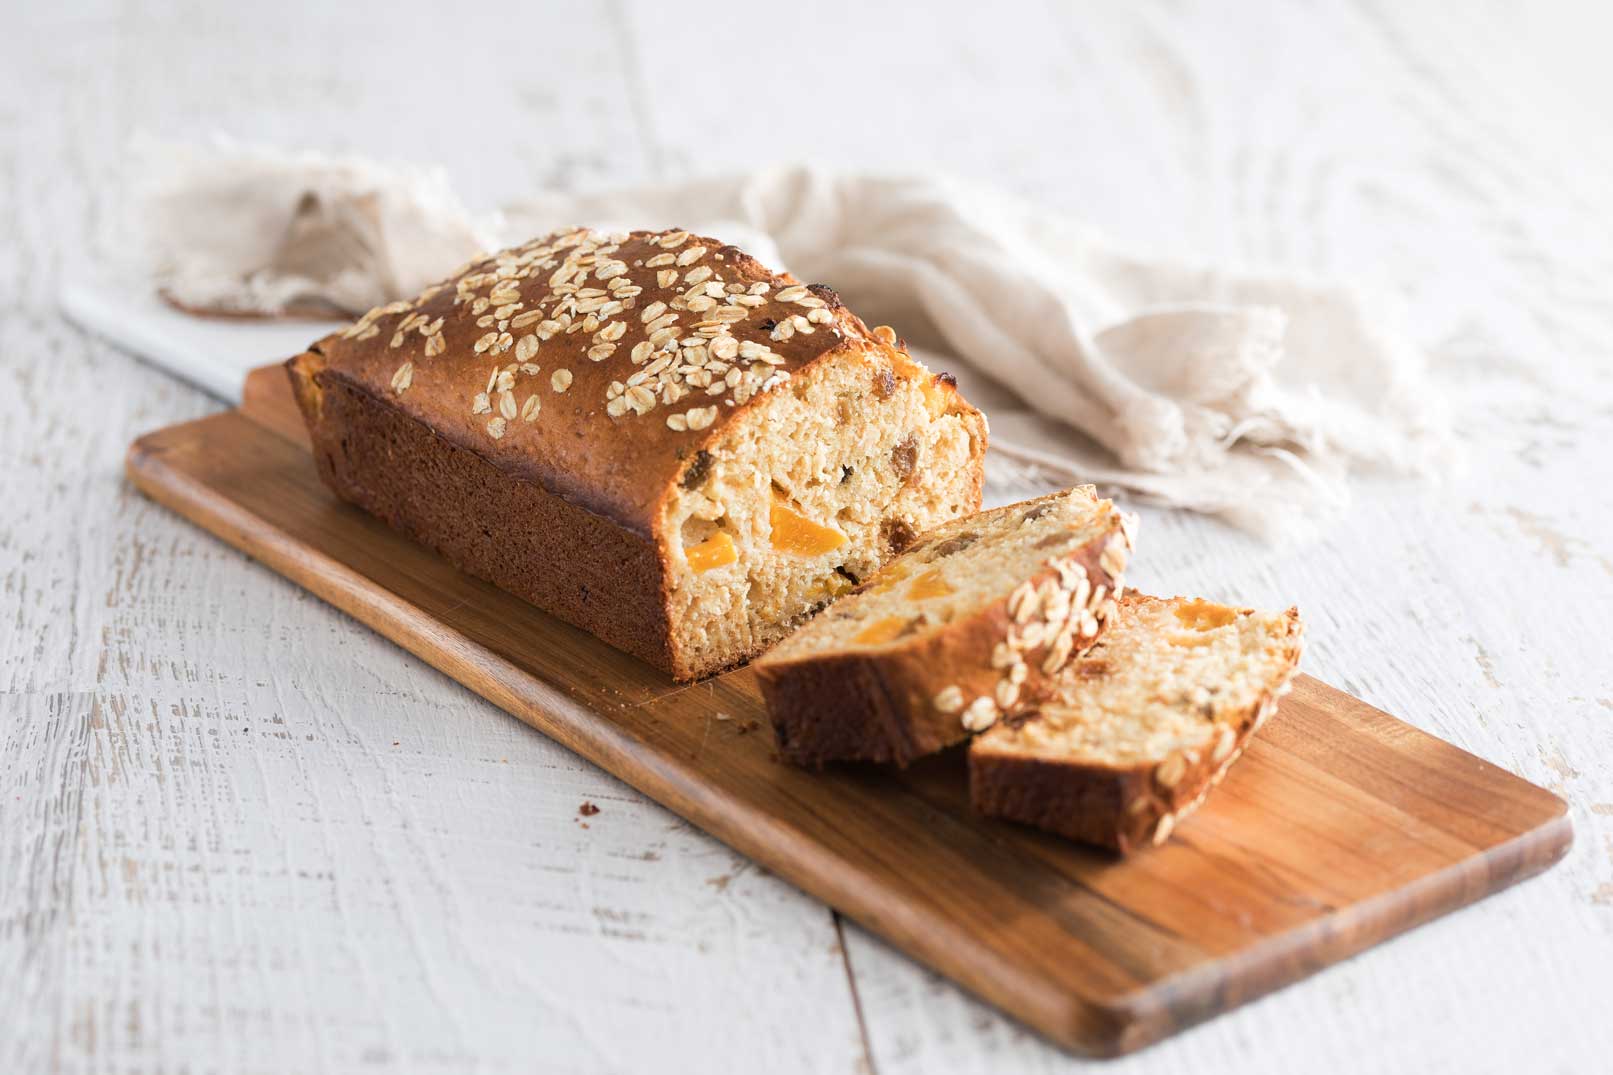 a baked loaf of oat, sultana and peach bread with two slices cut, served on a long wooden serving board with a white cloth napkin in the background